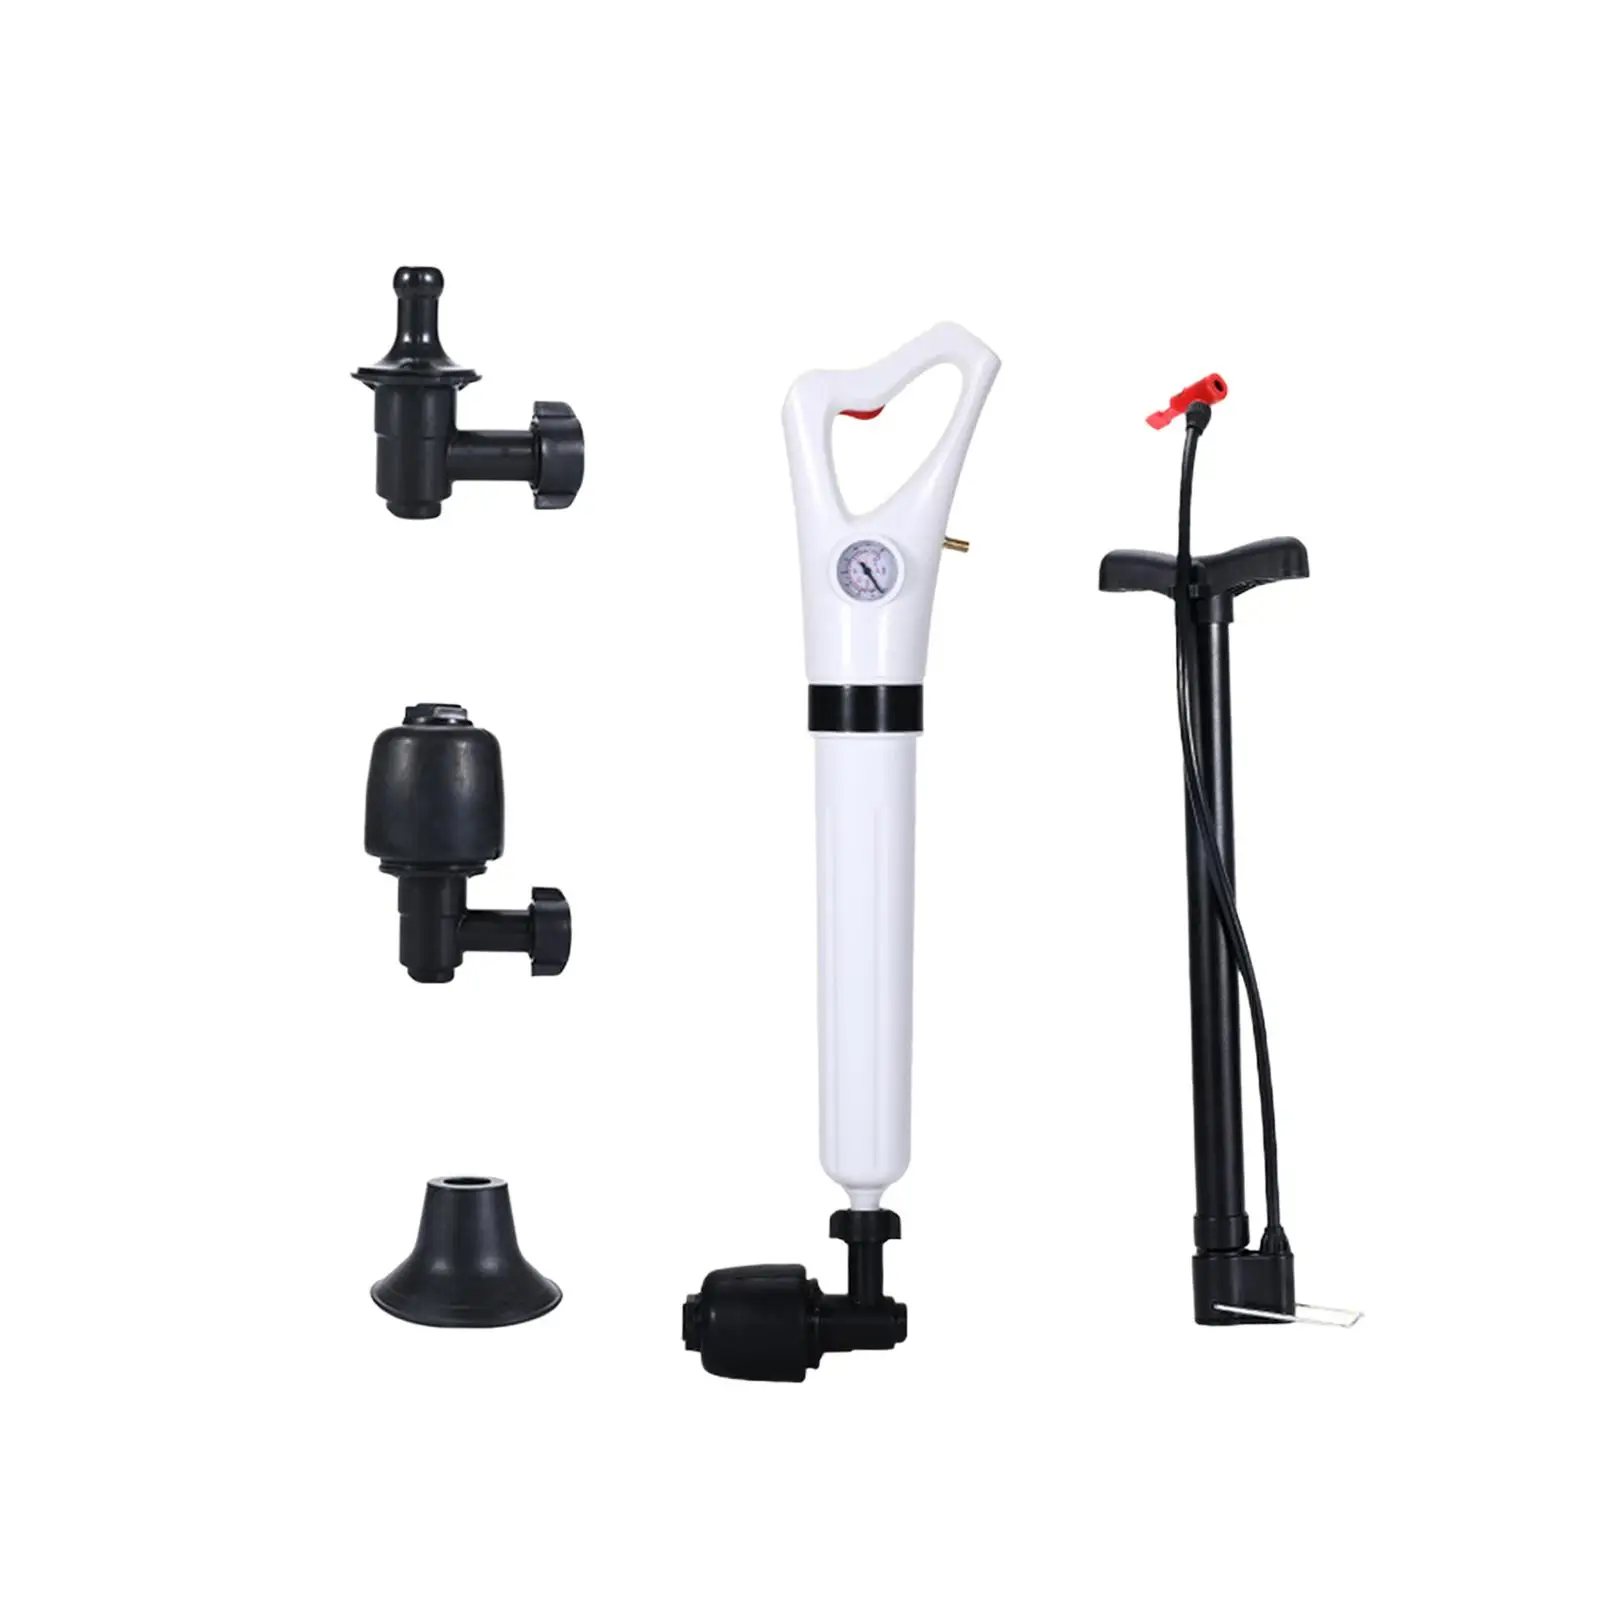 Toilet Plunger Set Plumbing Tools with Replaceable Heads Sewer Dredge Tool for Toilet Drains Piping Floor Drains Kitchen Squat